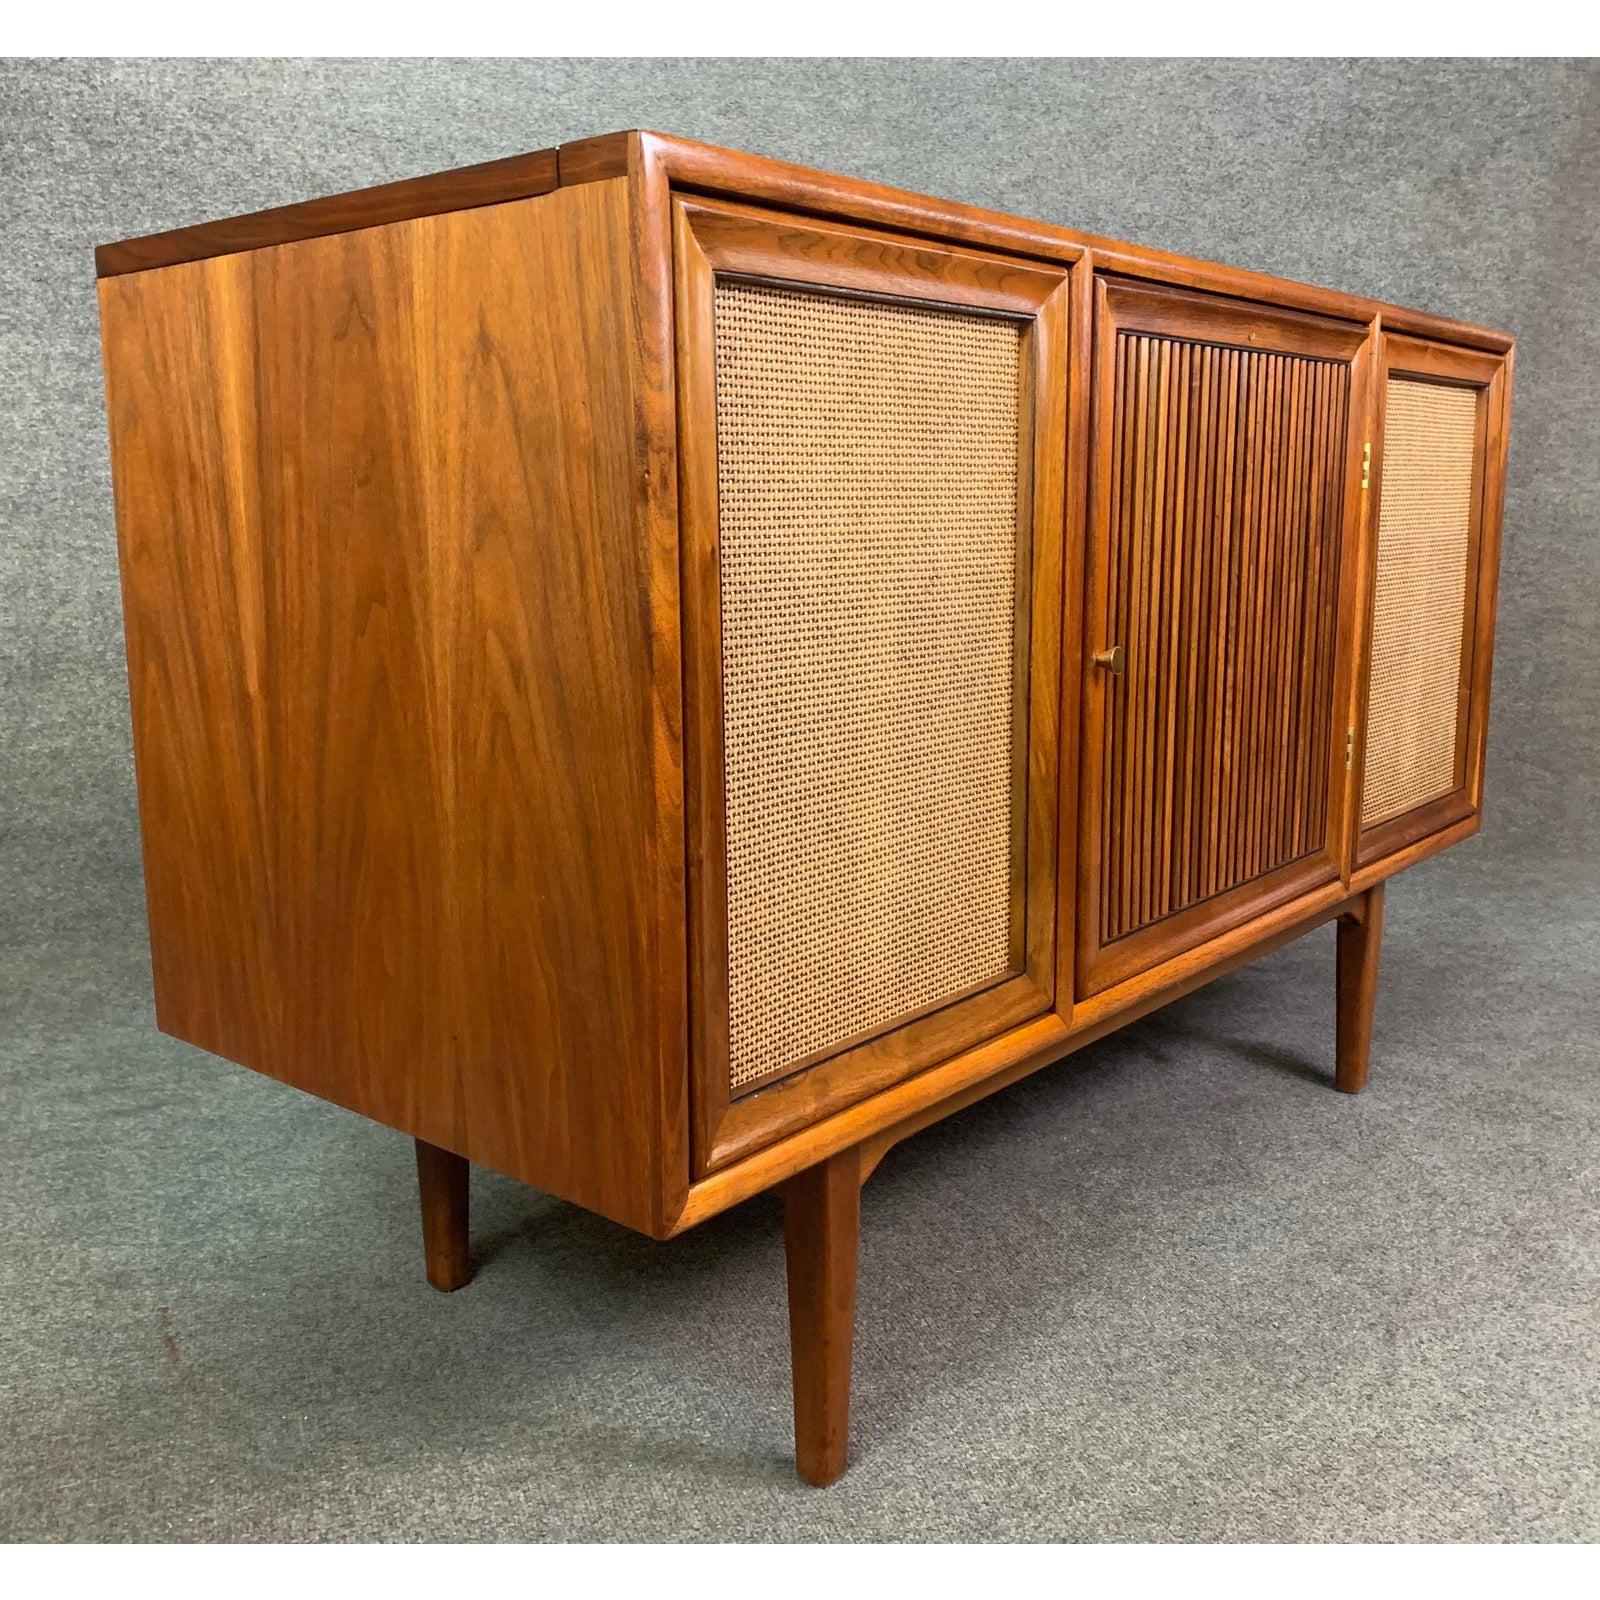 drexel stereo console